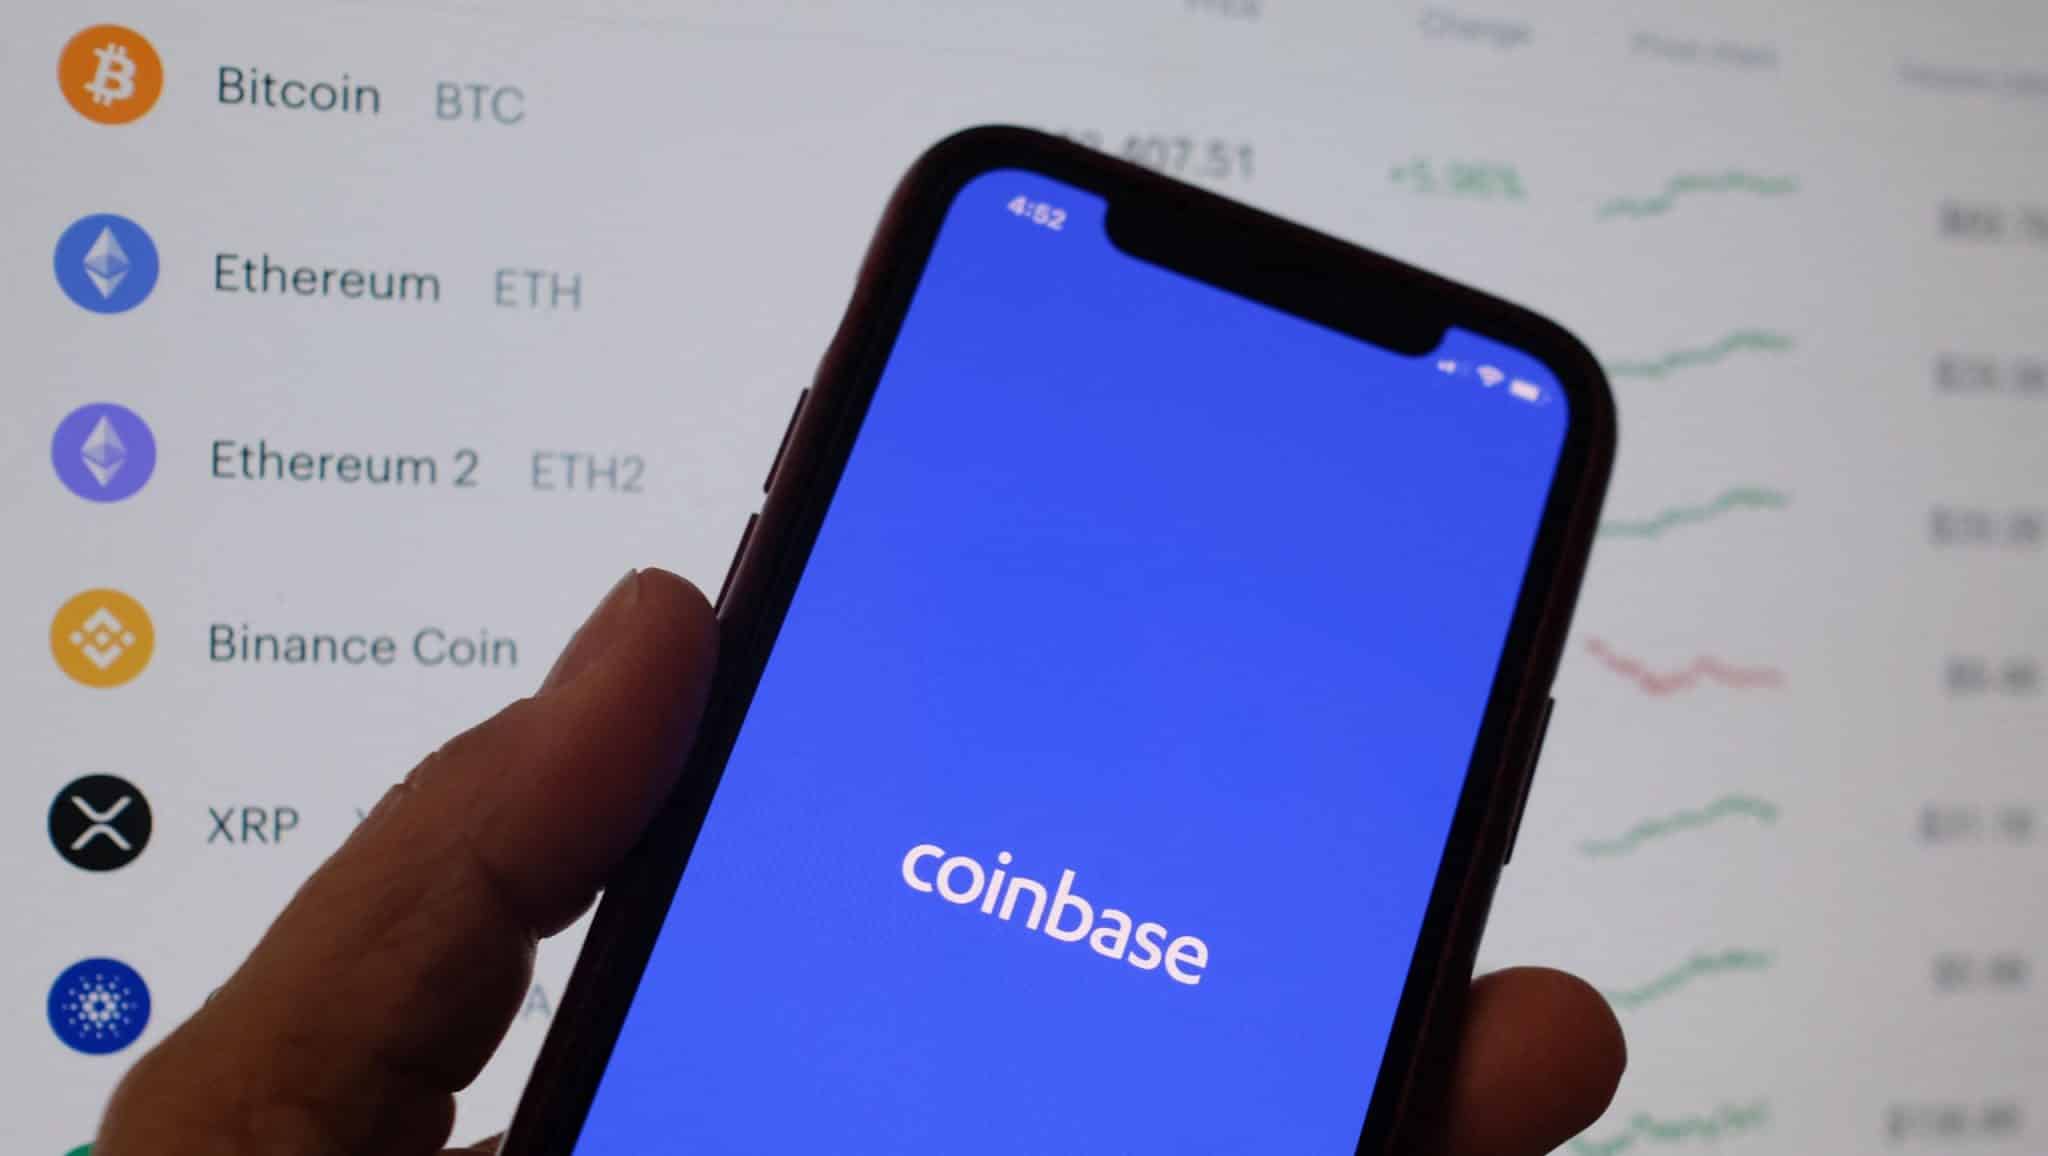 BREAKING: Coinbase Announces New Altcoin Listing